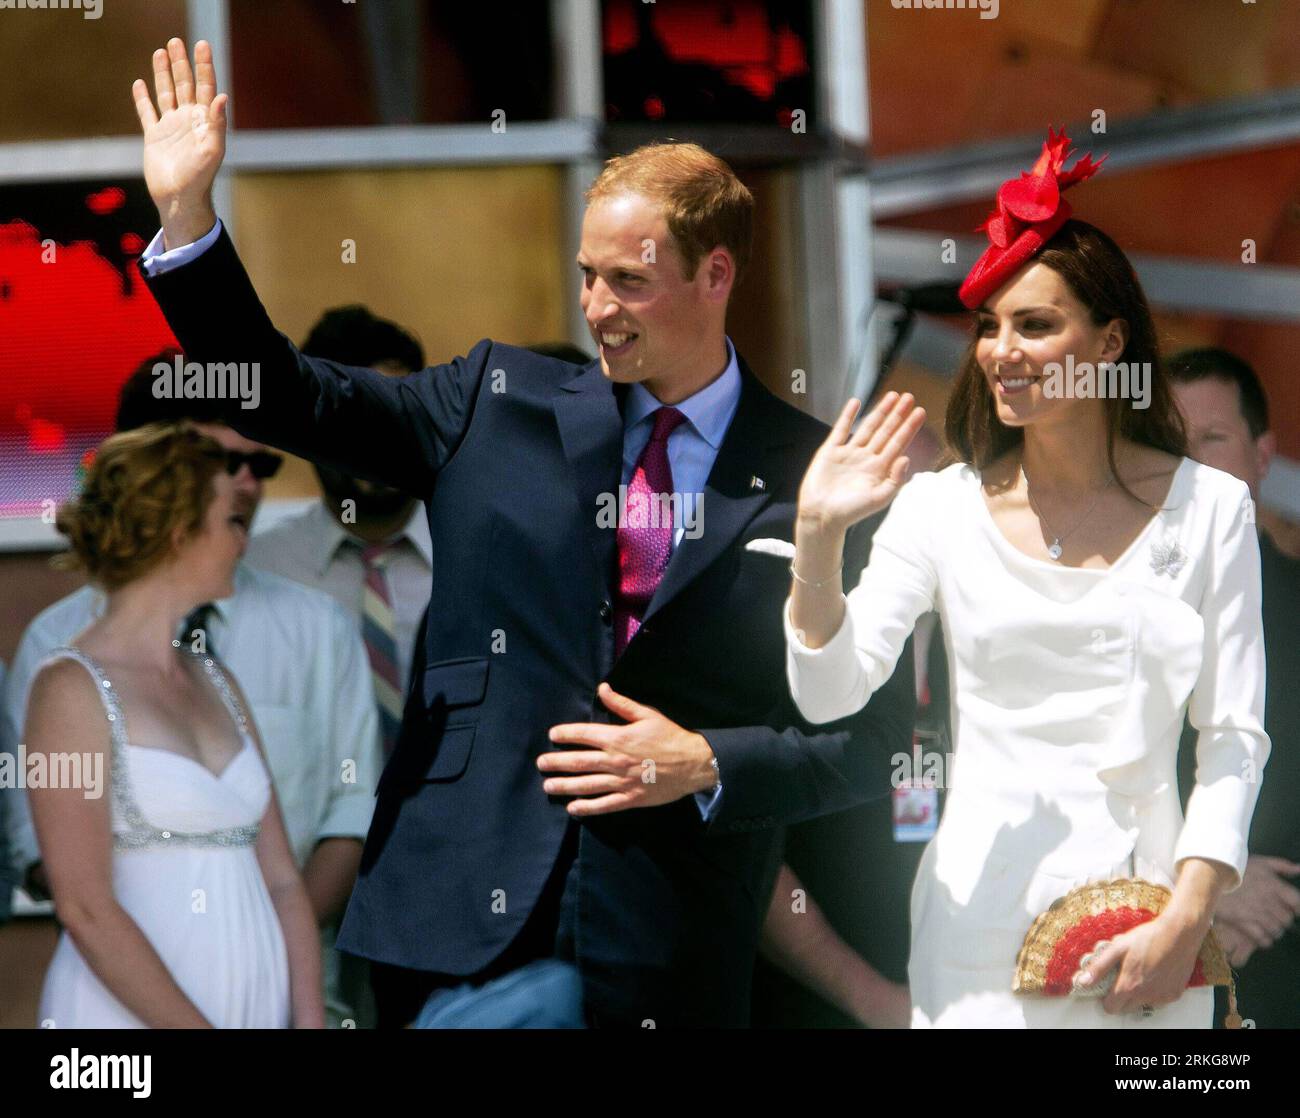 Bildnummer: 55565404  Datum: 01.07.2011  Copyright: imago/Xinhua (110702)-- OTTAWA, July 2, 2011 (Xinhua) -- Britain s Prince William and his wife Kate wave to the crowds during the 144th Canada Day celebrations on Parliament Hill in Ottawa, Canada, on July 1, 2011. The Royal couple is on a nine-day official visit to Canada, their first overseas trip since being married.(Xinhua/Christopher Pike)(zl) CANADA-CANADA DAY-CELEBRATION PUBLICATIONxNOTxINxCHN People Entertainment Adel GBR Königshaus Familie Frau Ehefrau Kate xda x0x premiumd Middleton 2011 quer   Catherine Duchess Cambridge    Bildnum Stock Photo